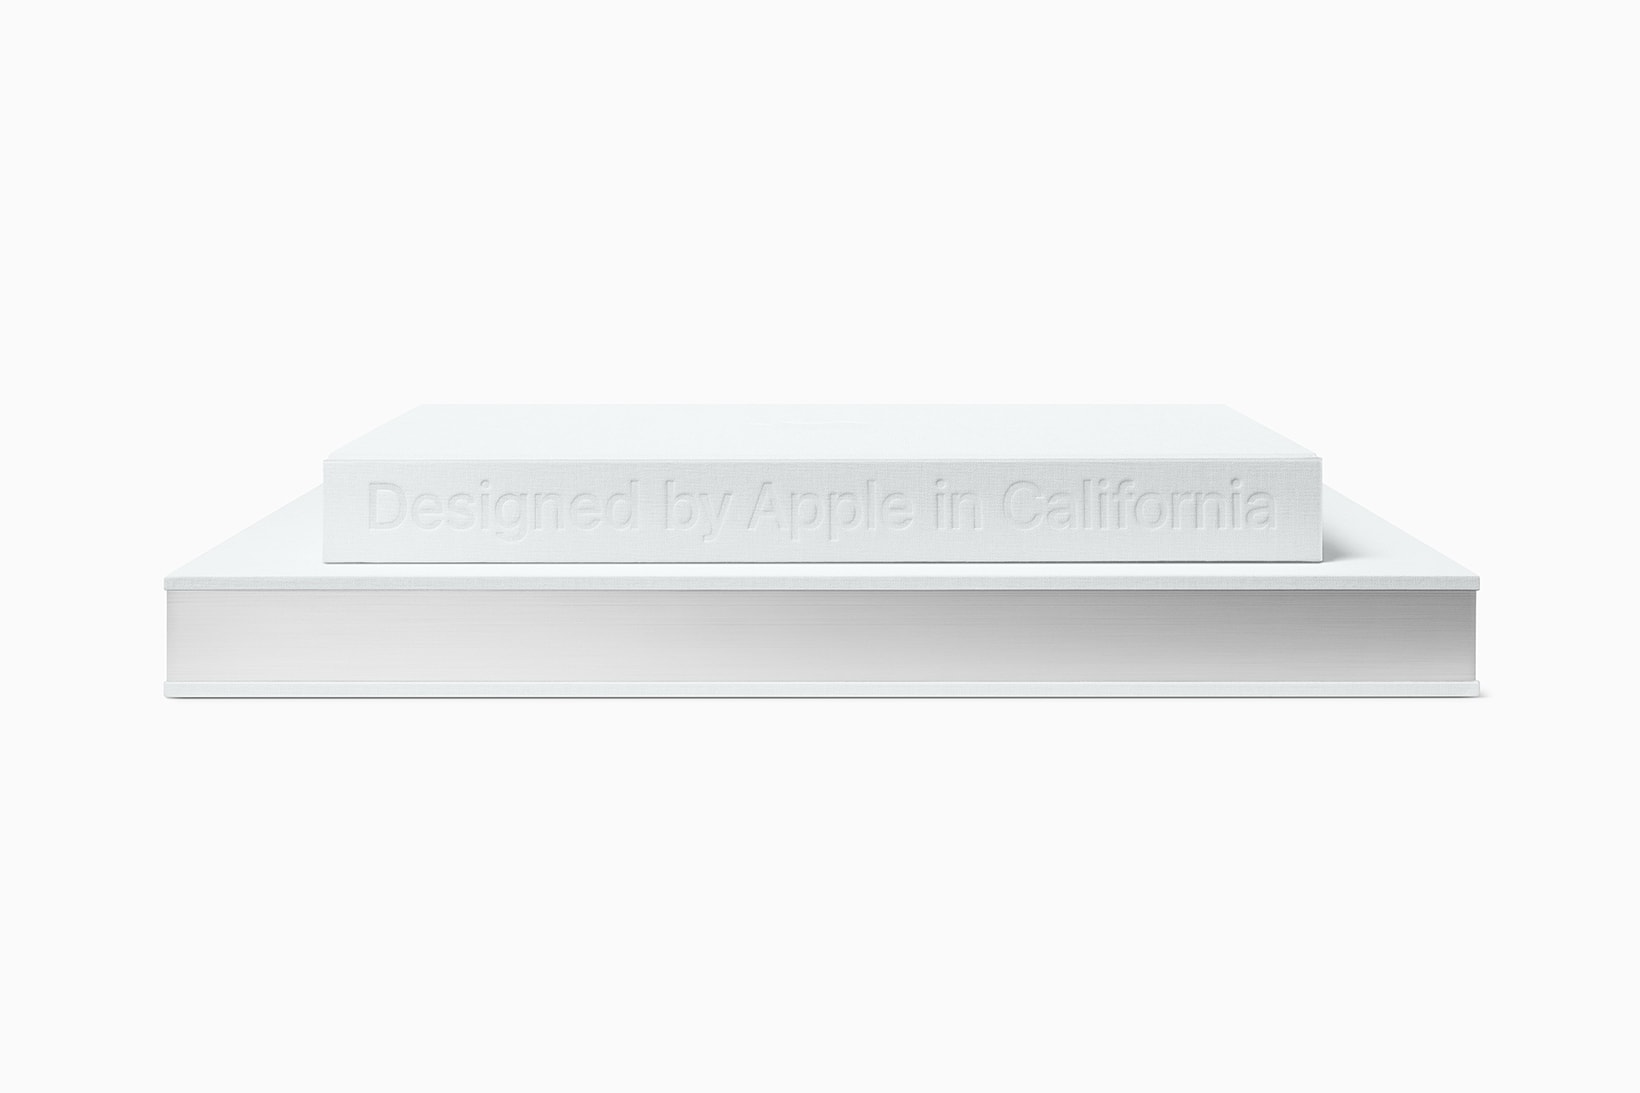 Designed by Apple in California Coffee Table Photo Book